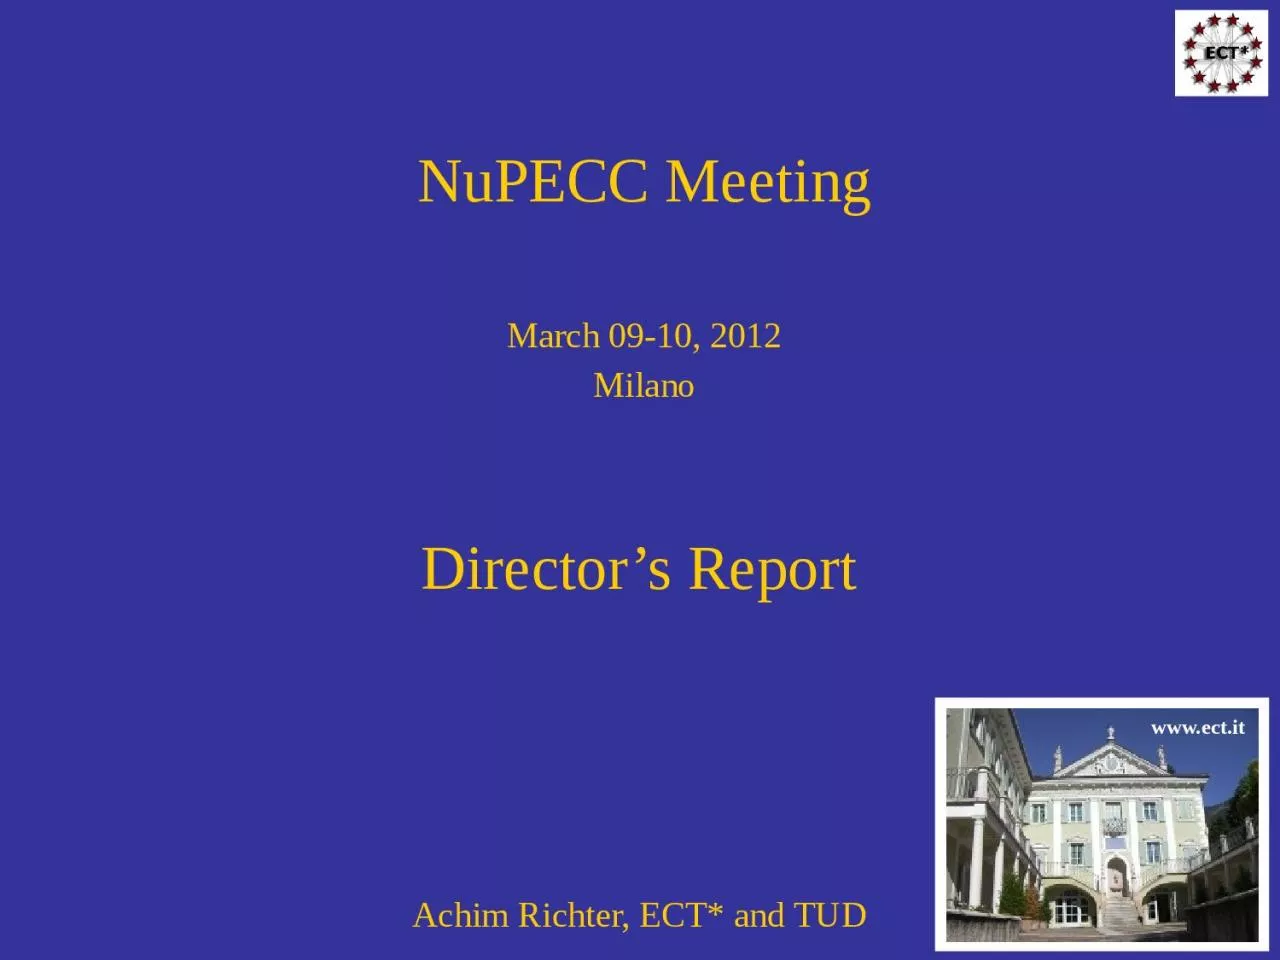 NuPECC Meeting March 09-10, 2012